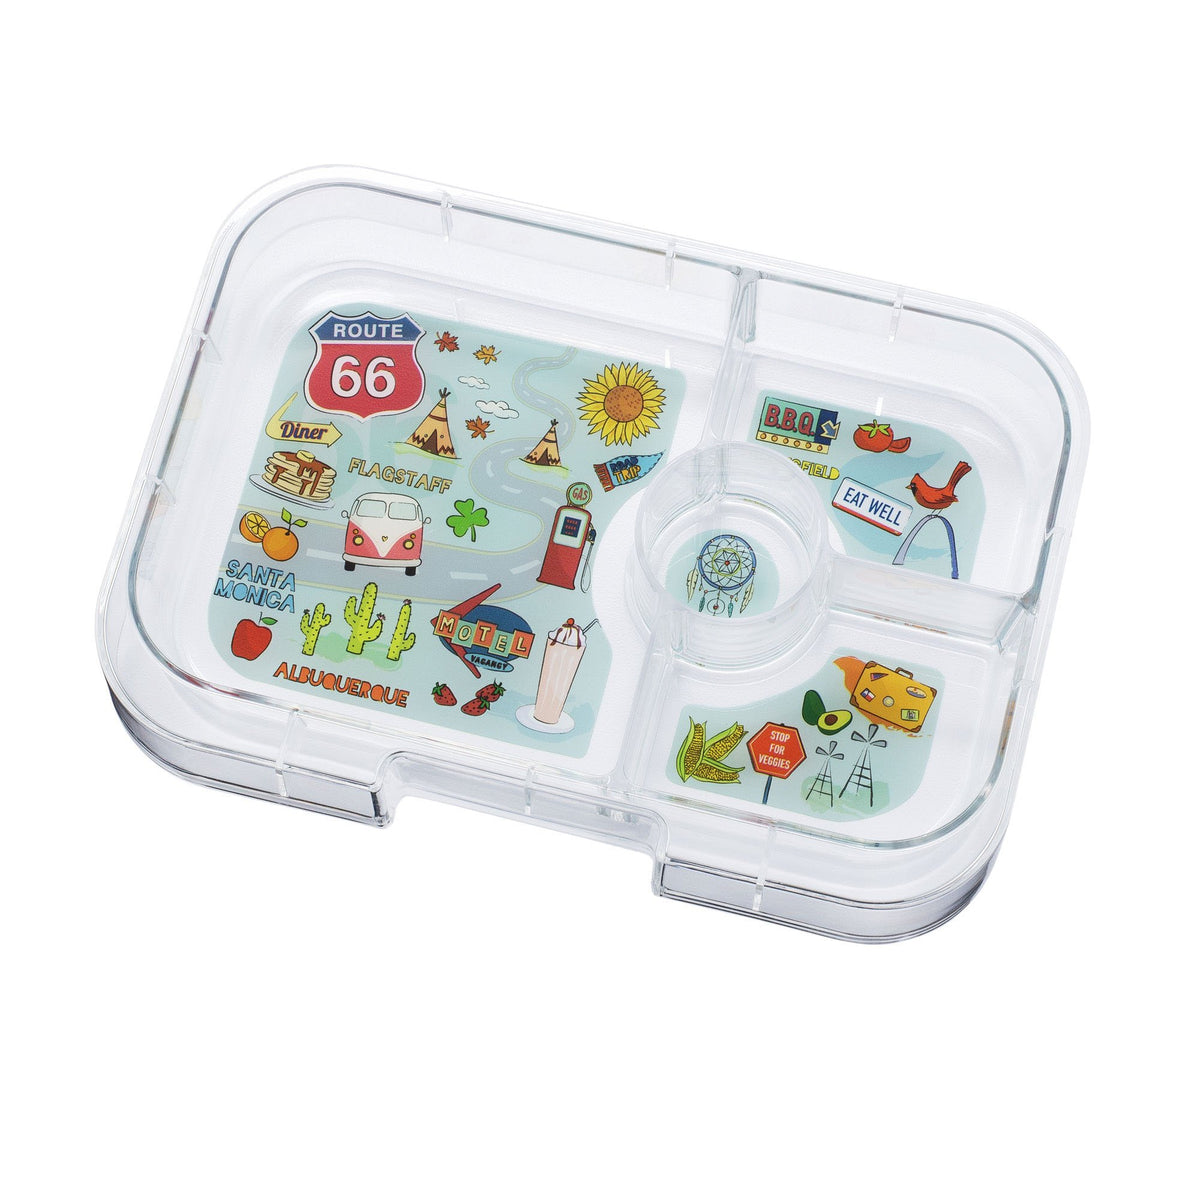 yumbox-panino-blue-fish-route-66-4-compartment-lunch-box- (2)